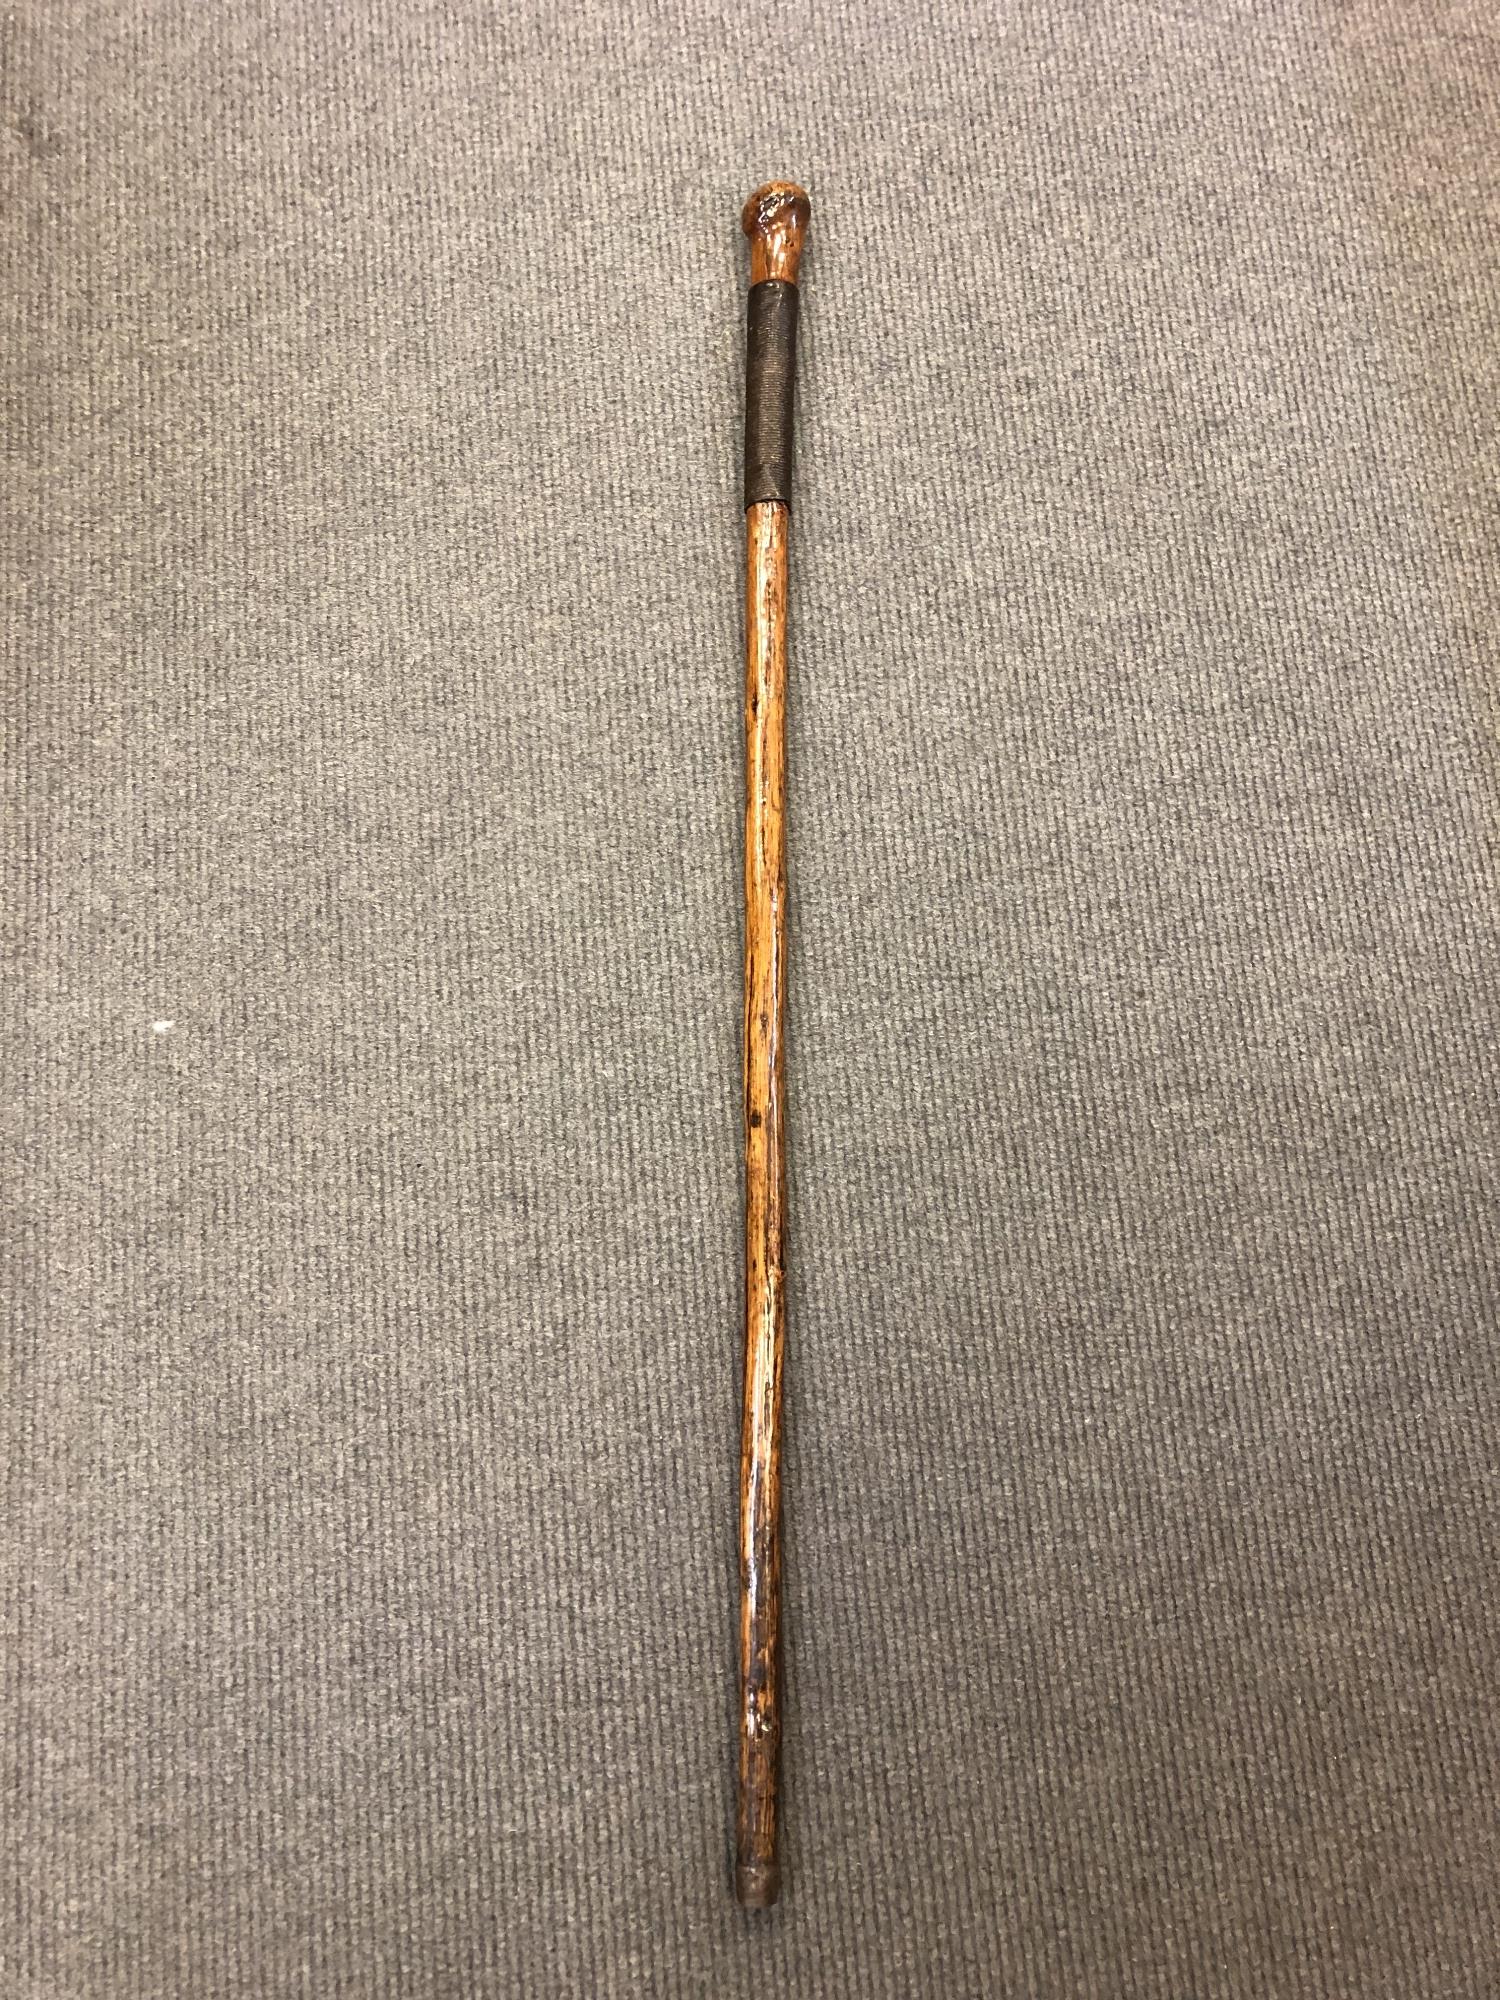 An early 20th century sword cane, with coin-inset pommel revealing a 15cm blade.